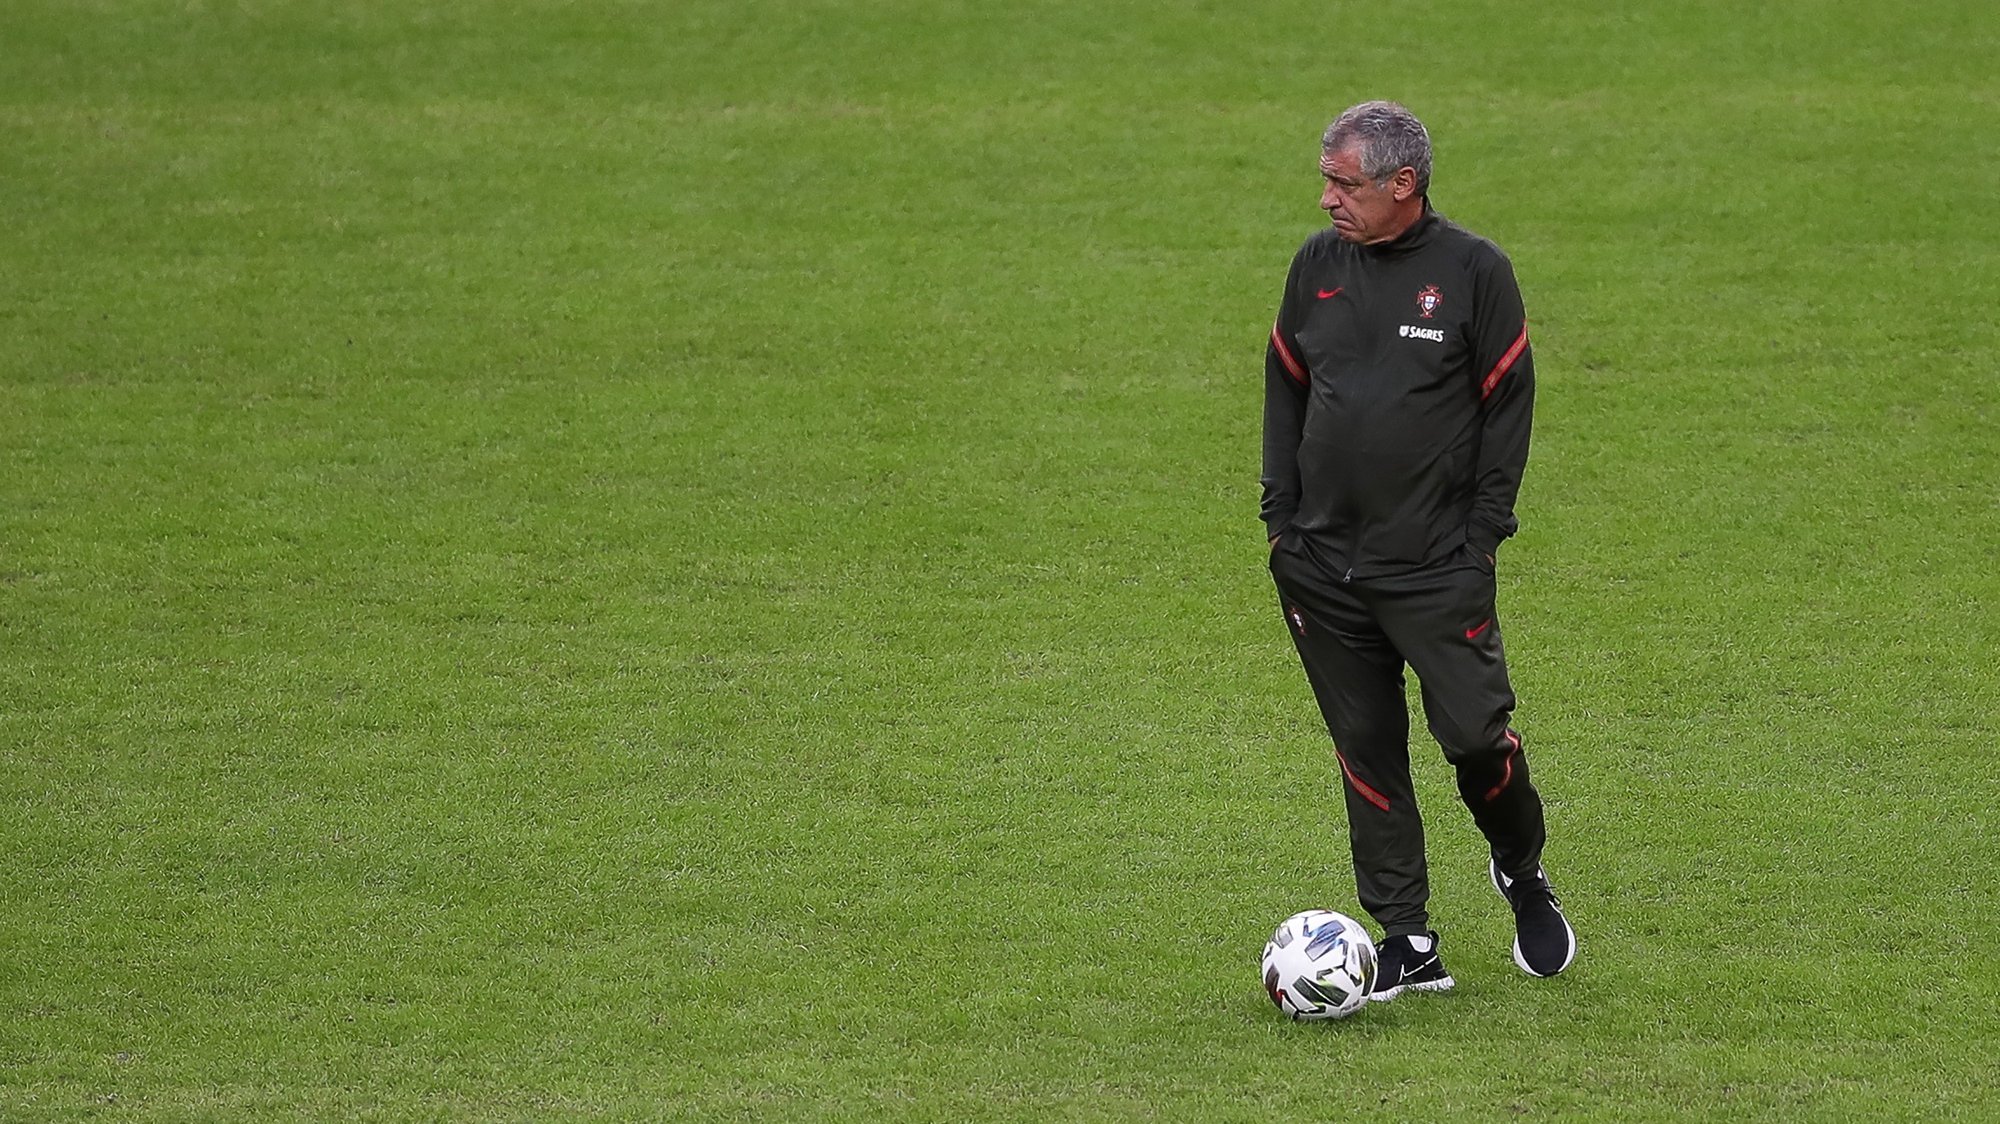 epa08652952 Portugal &#039;s head coach Fernando Santos leads  the team training session at Friends Arena, in Stockholm, Sweden, 07 September 2020. Portugal will face Sweden in a UEFA Nations League match on 08 September.  EPA/MARIO CRUZ